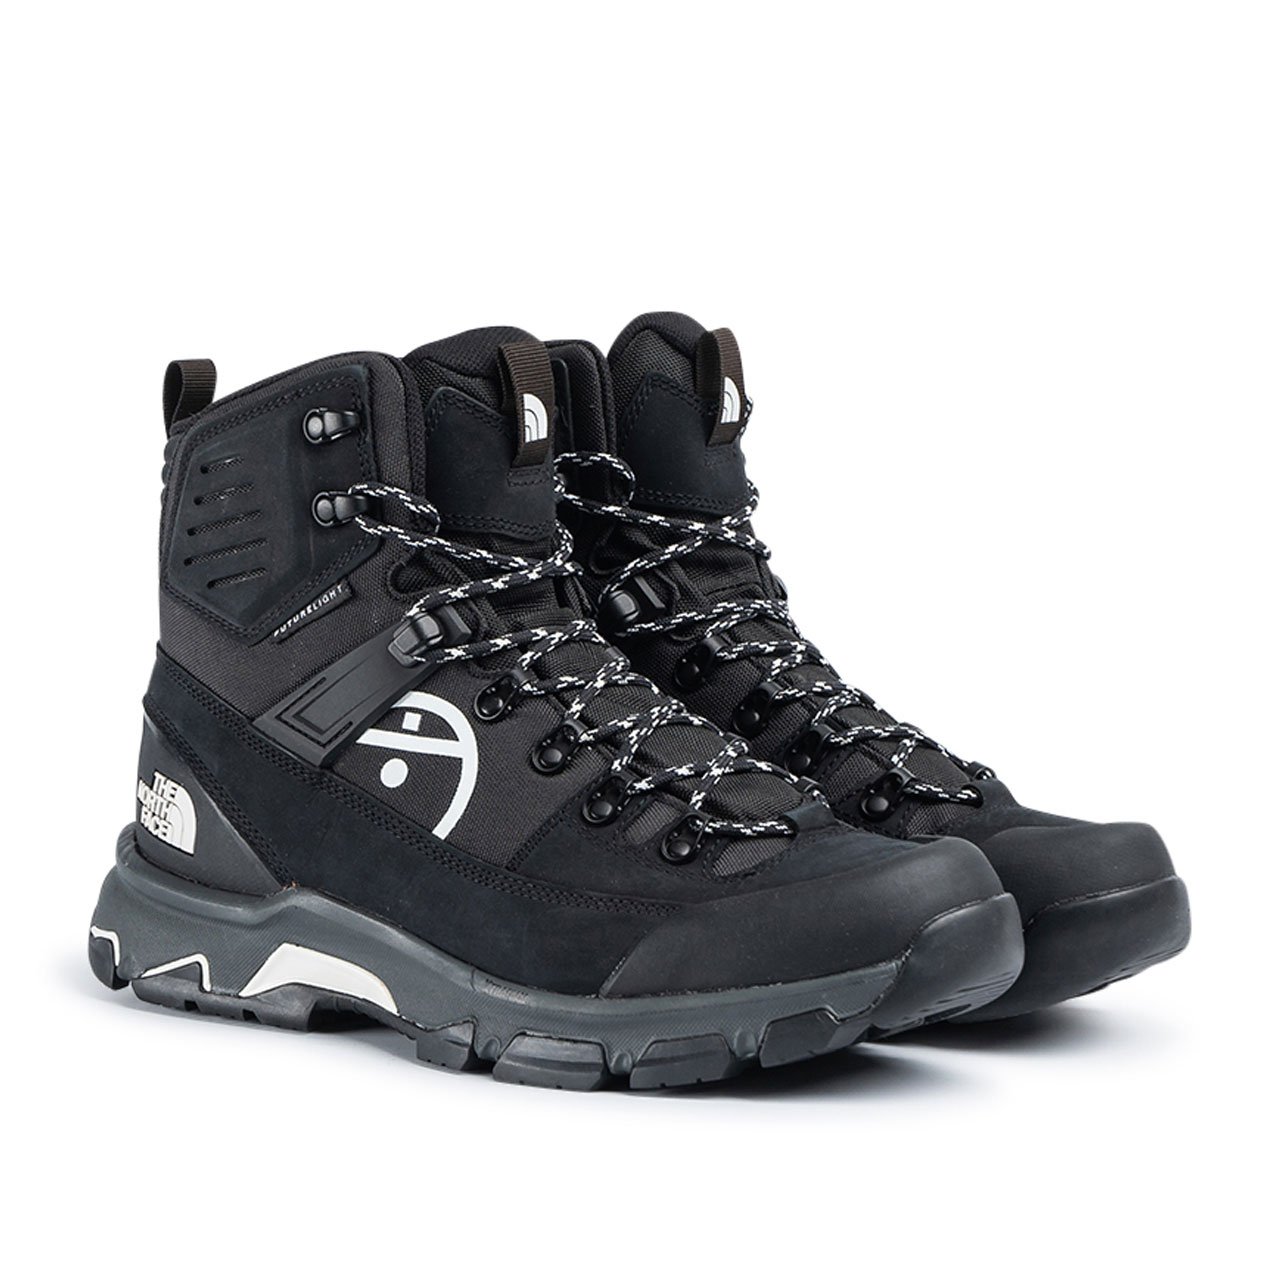 the north face black series steep tech crestvale boots (black) - nf0a4t2nky4 - a.plus - Image - 2